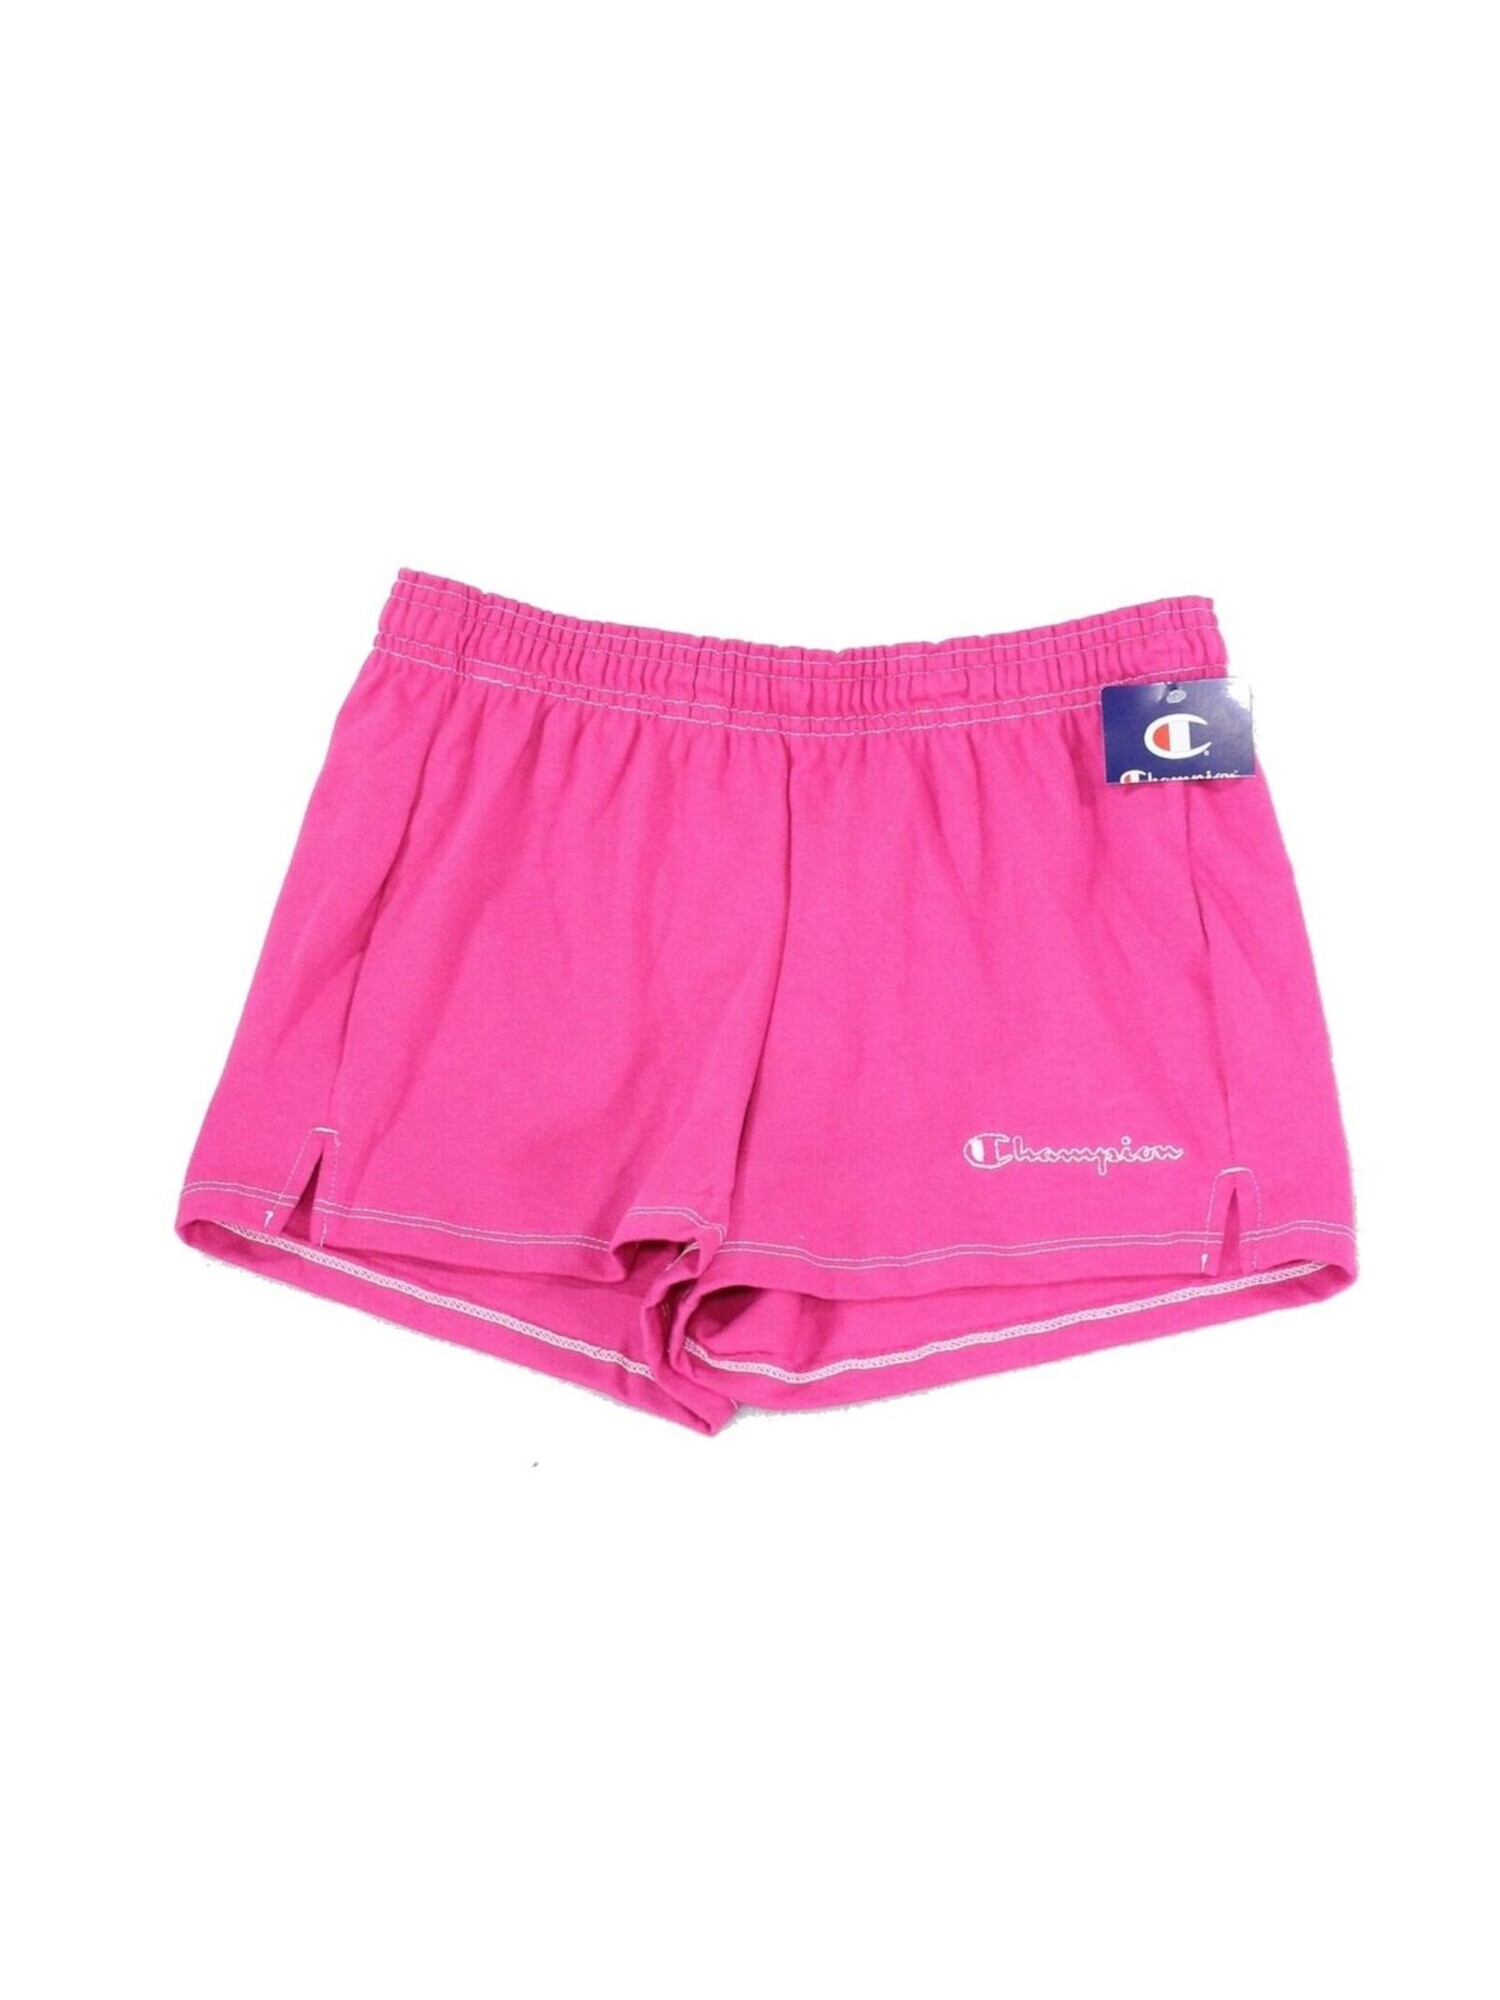 CHAMPION Womens Pink Stretch Active Wear Shorts XL